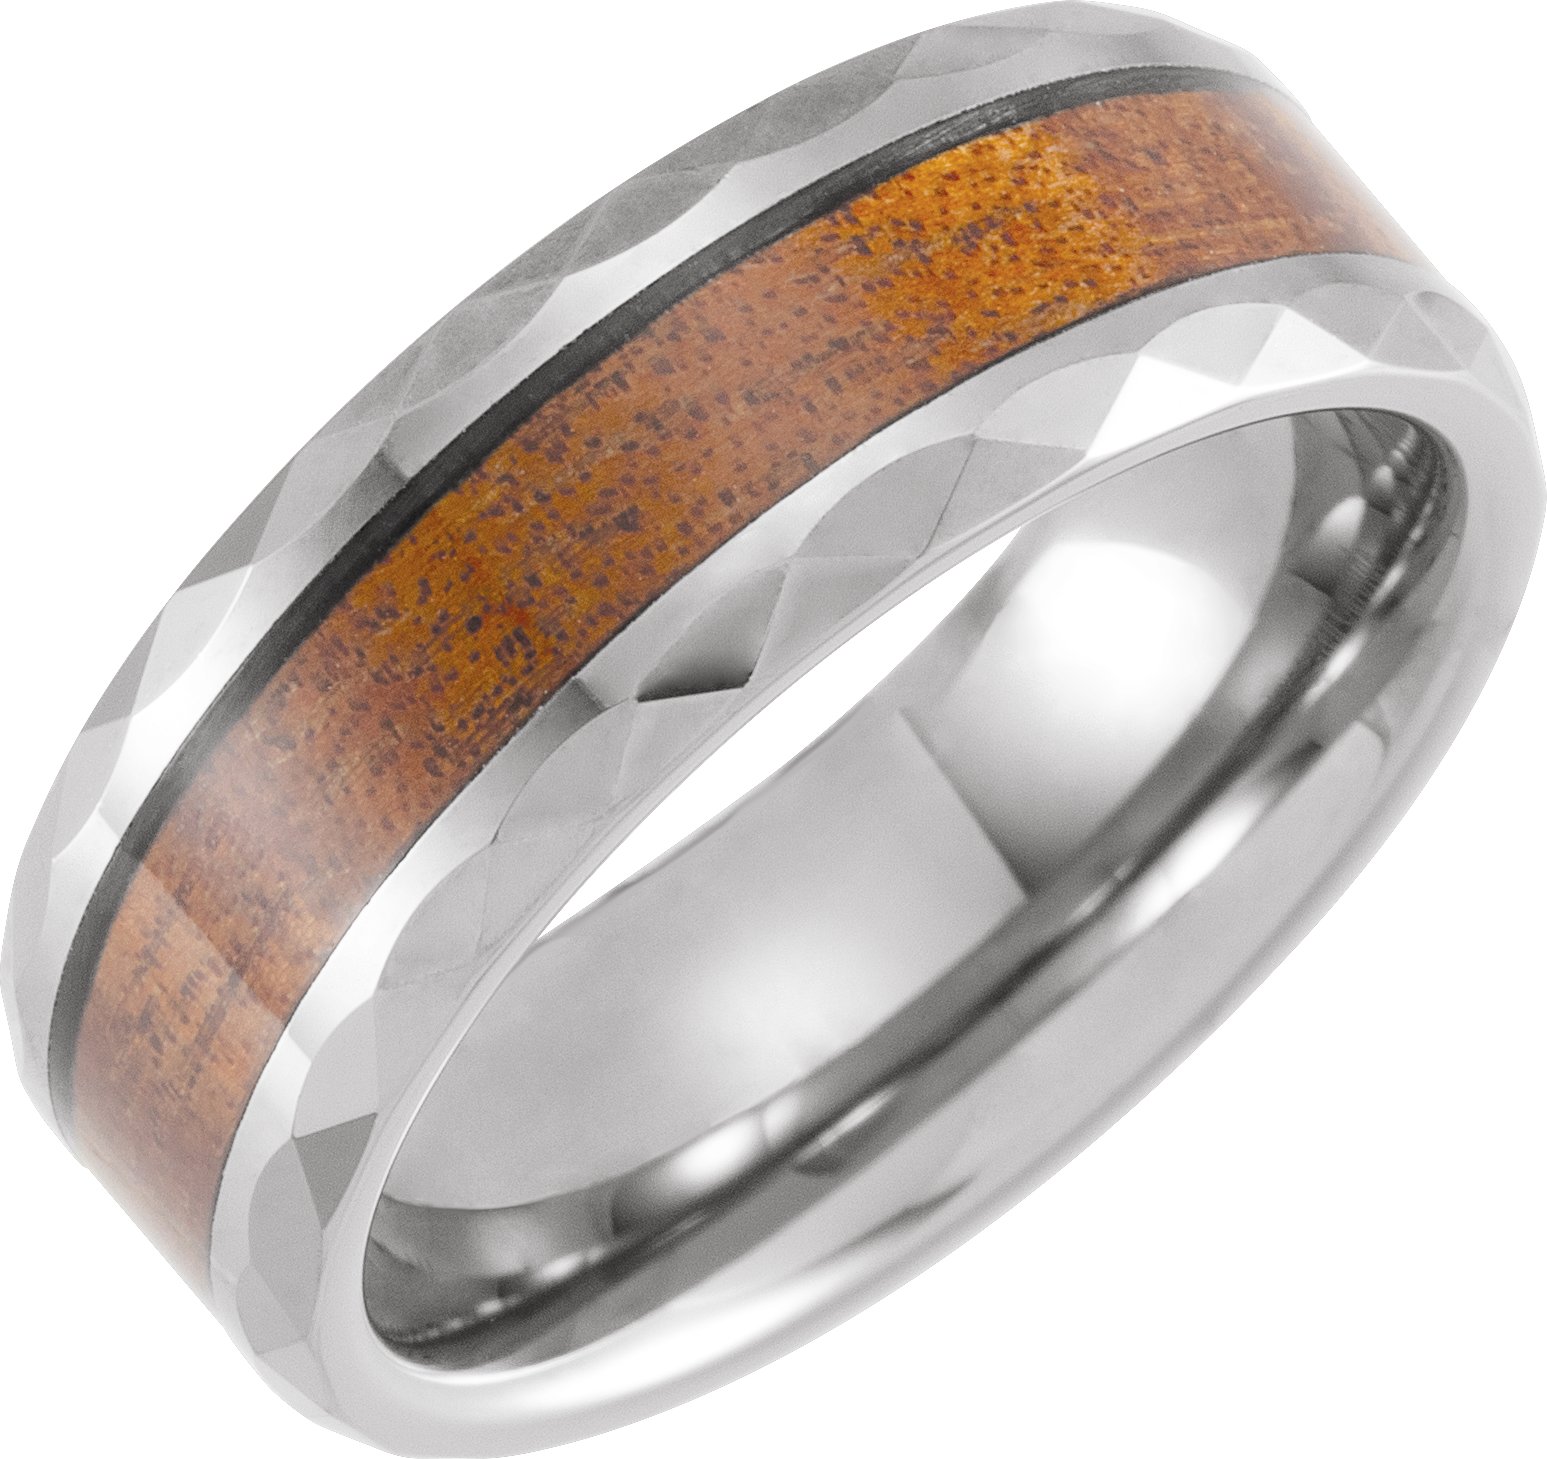 Tungsten 8 mm Beveled Band with Acacia Wood Inlay Size 11.5